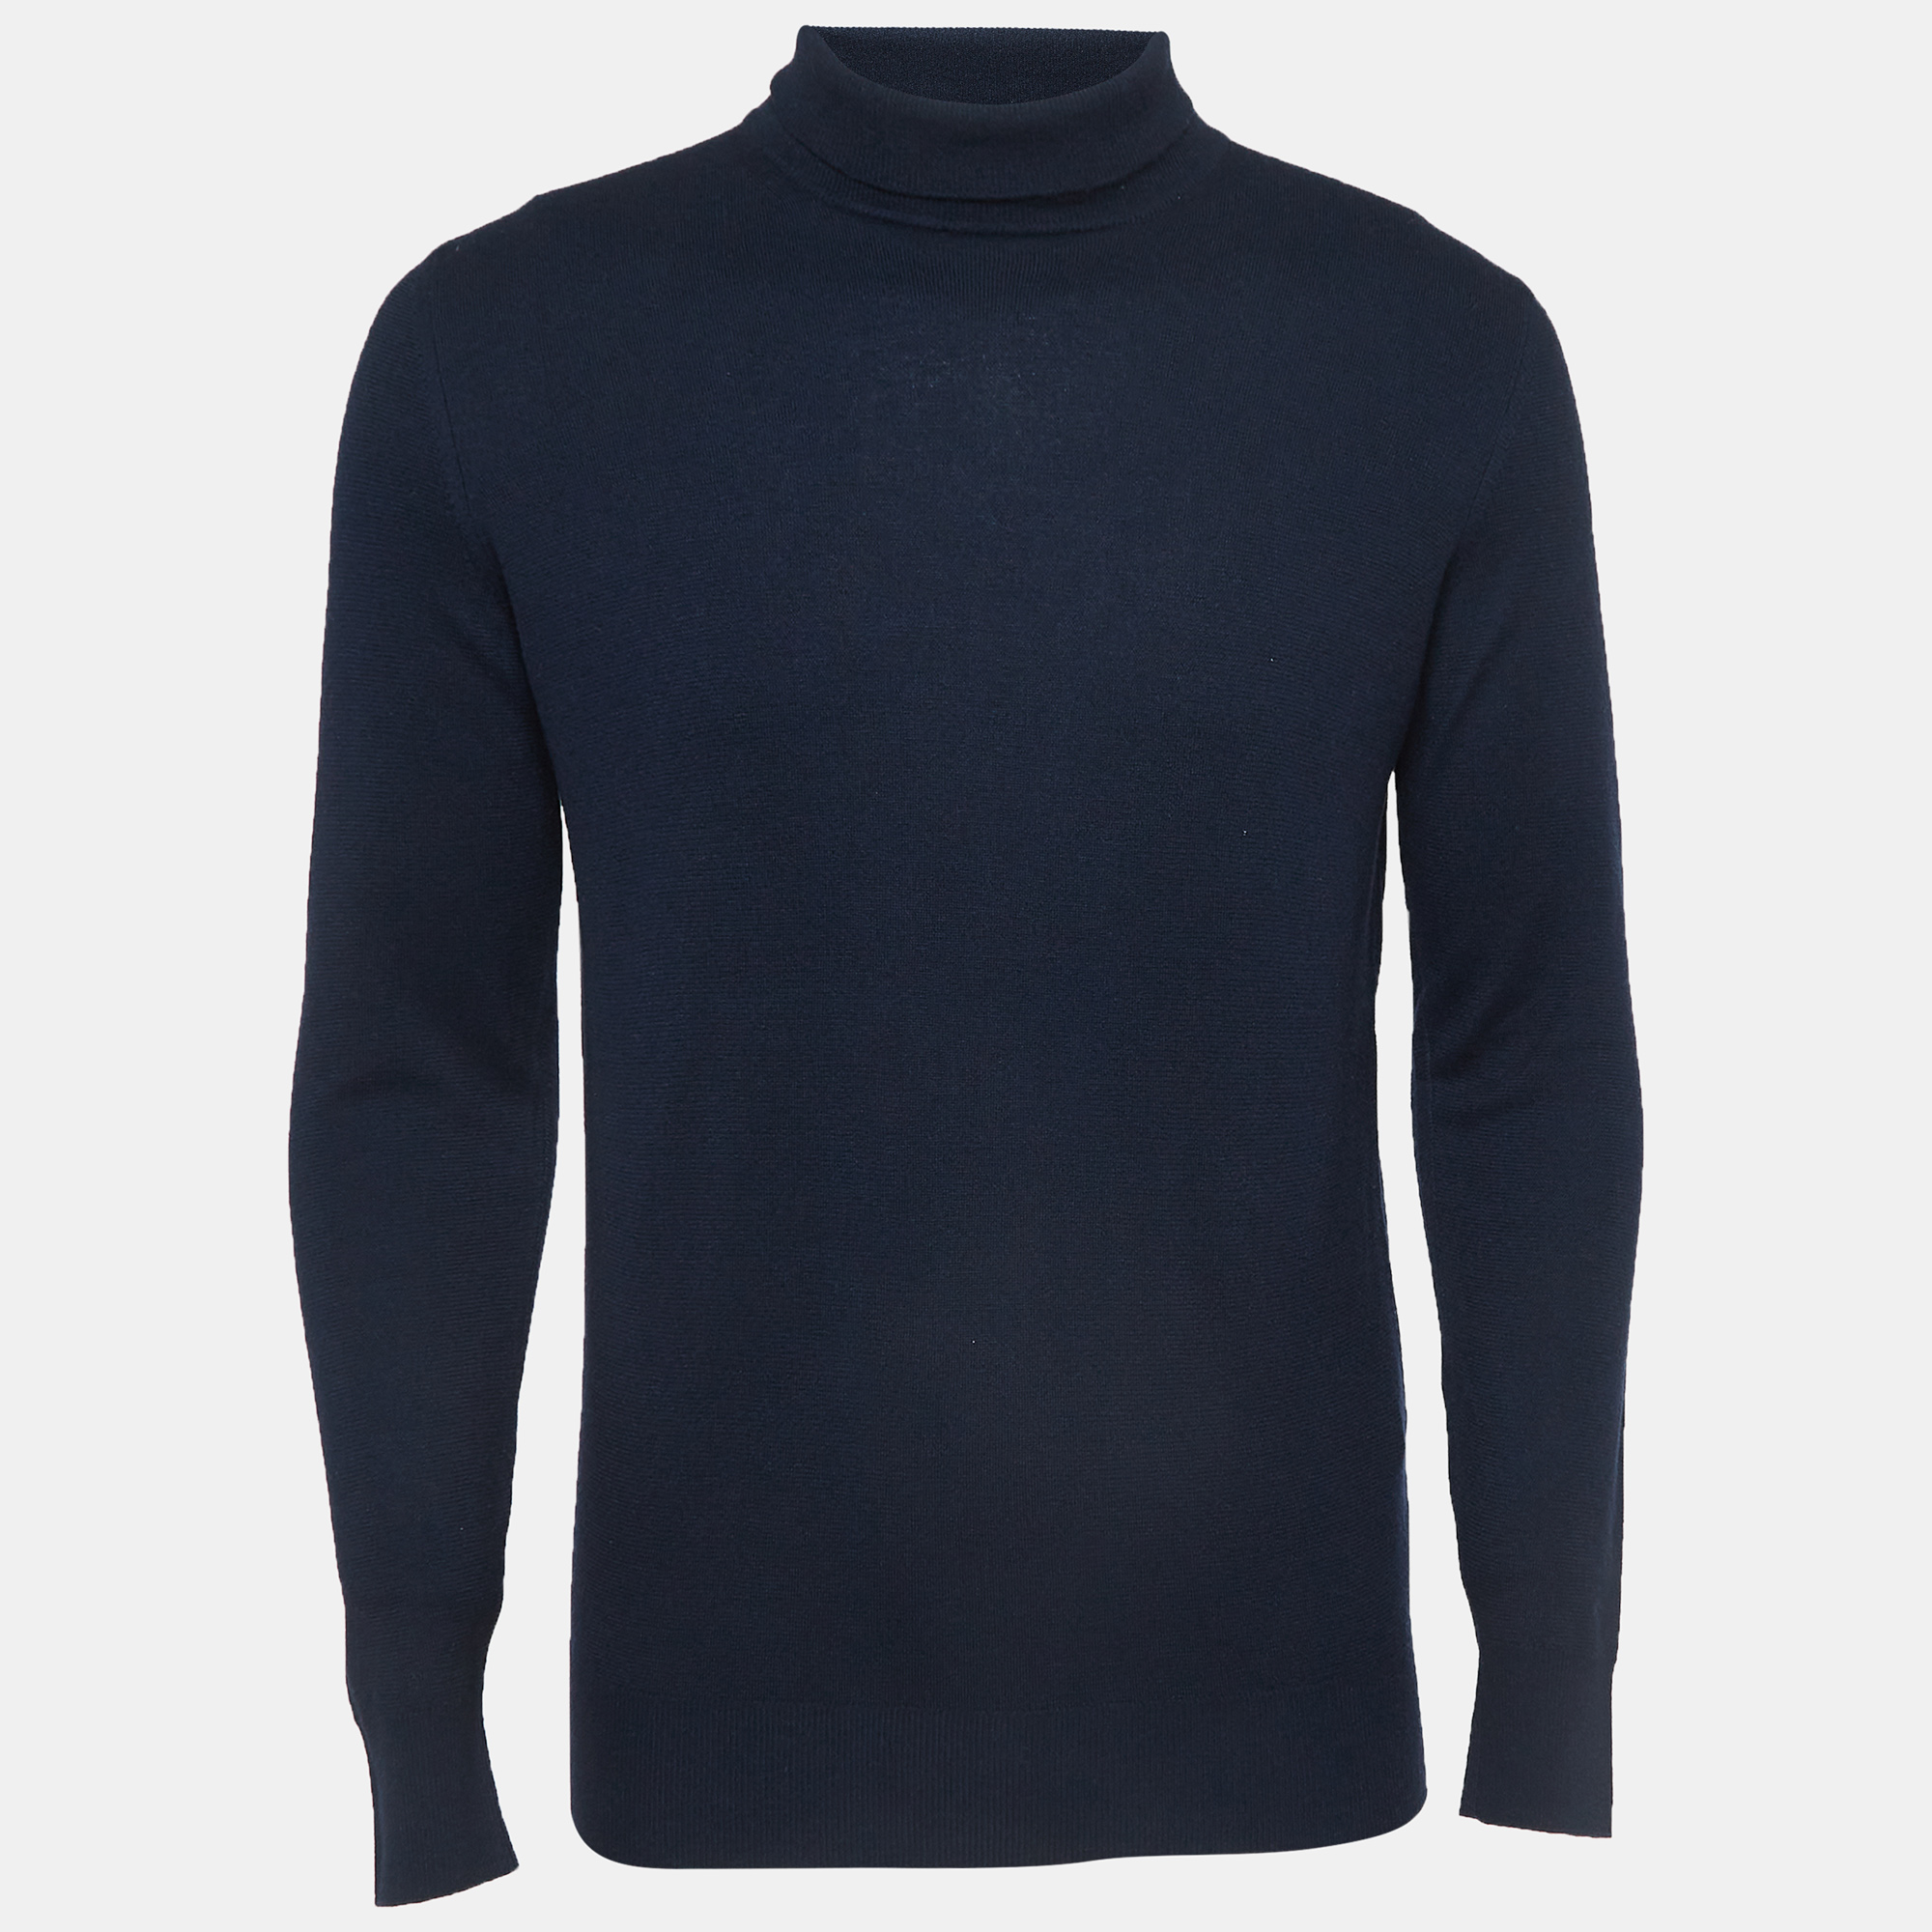 Navy Blue Baby Cashmere Turtle Neck Sweater